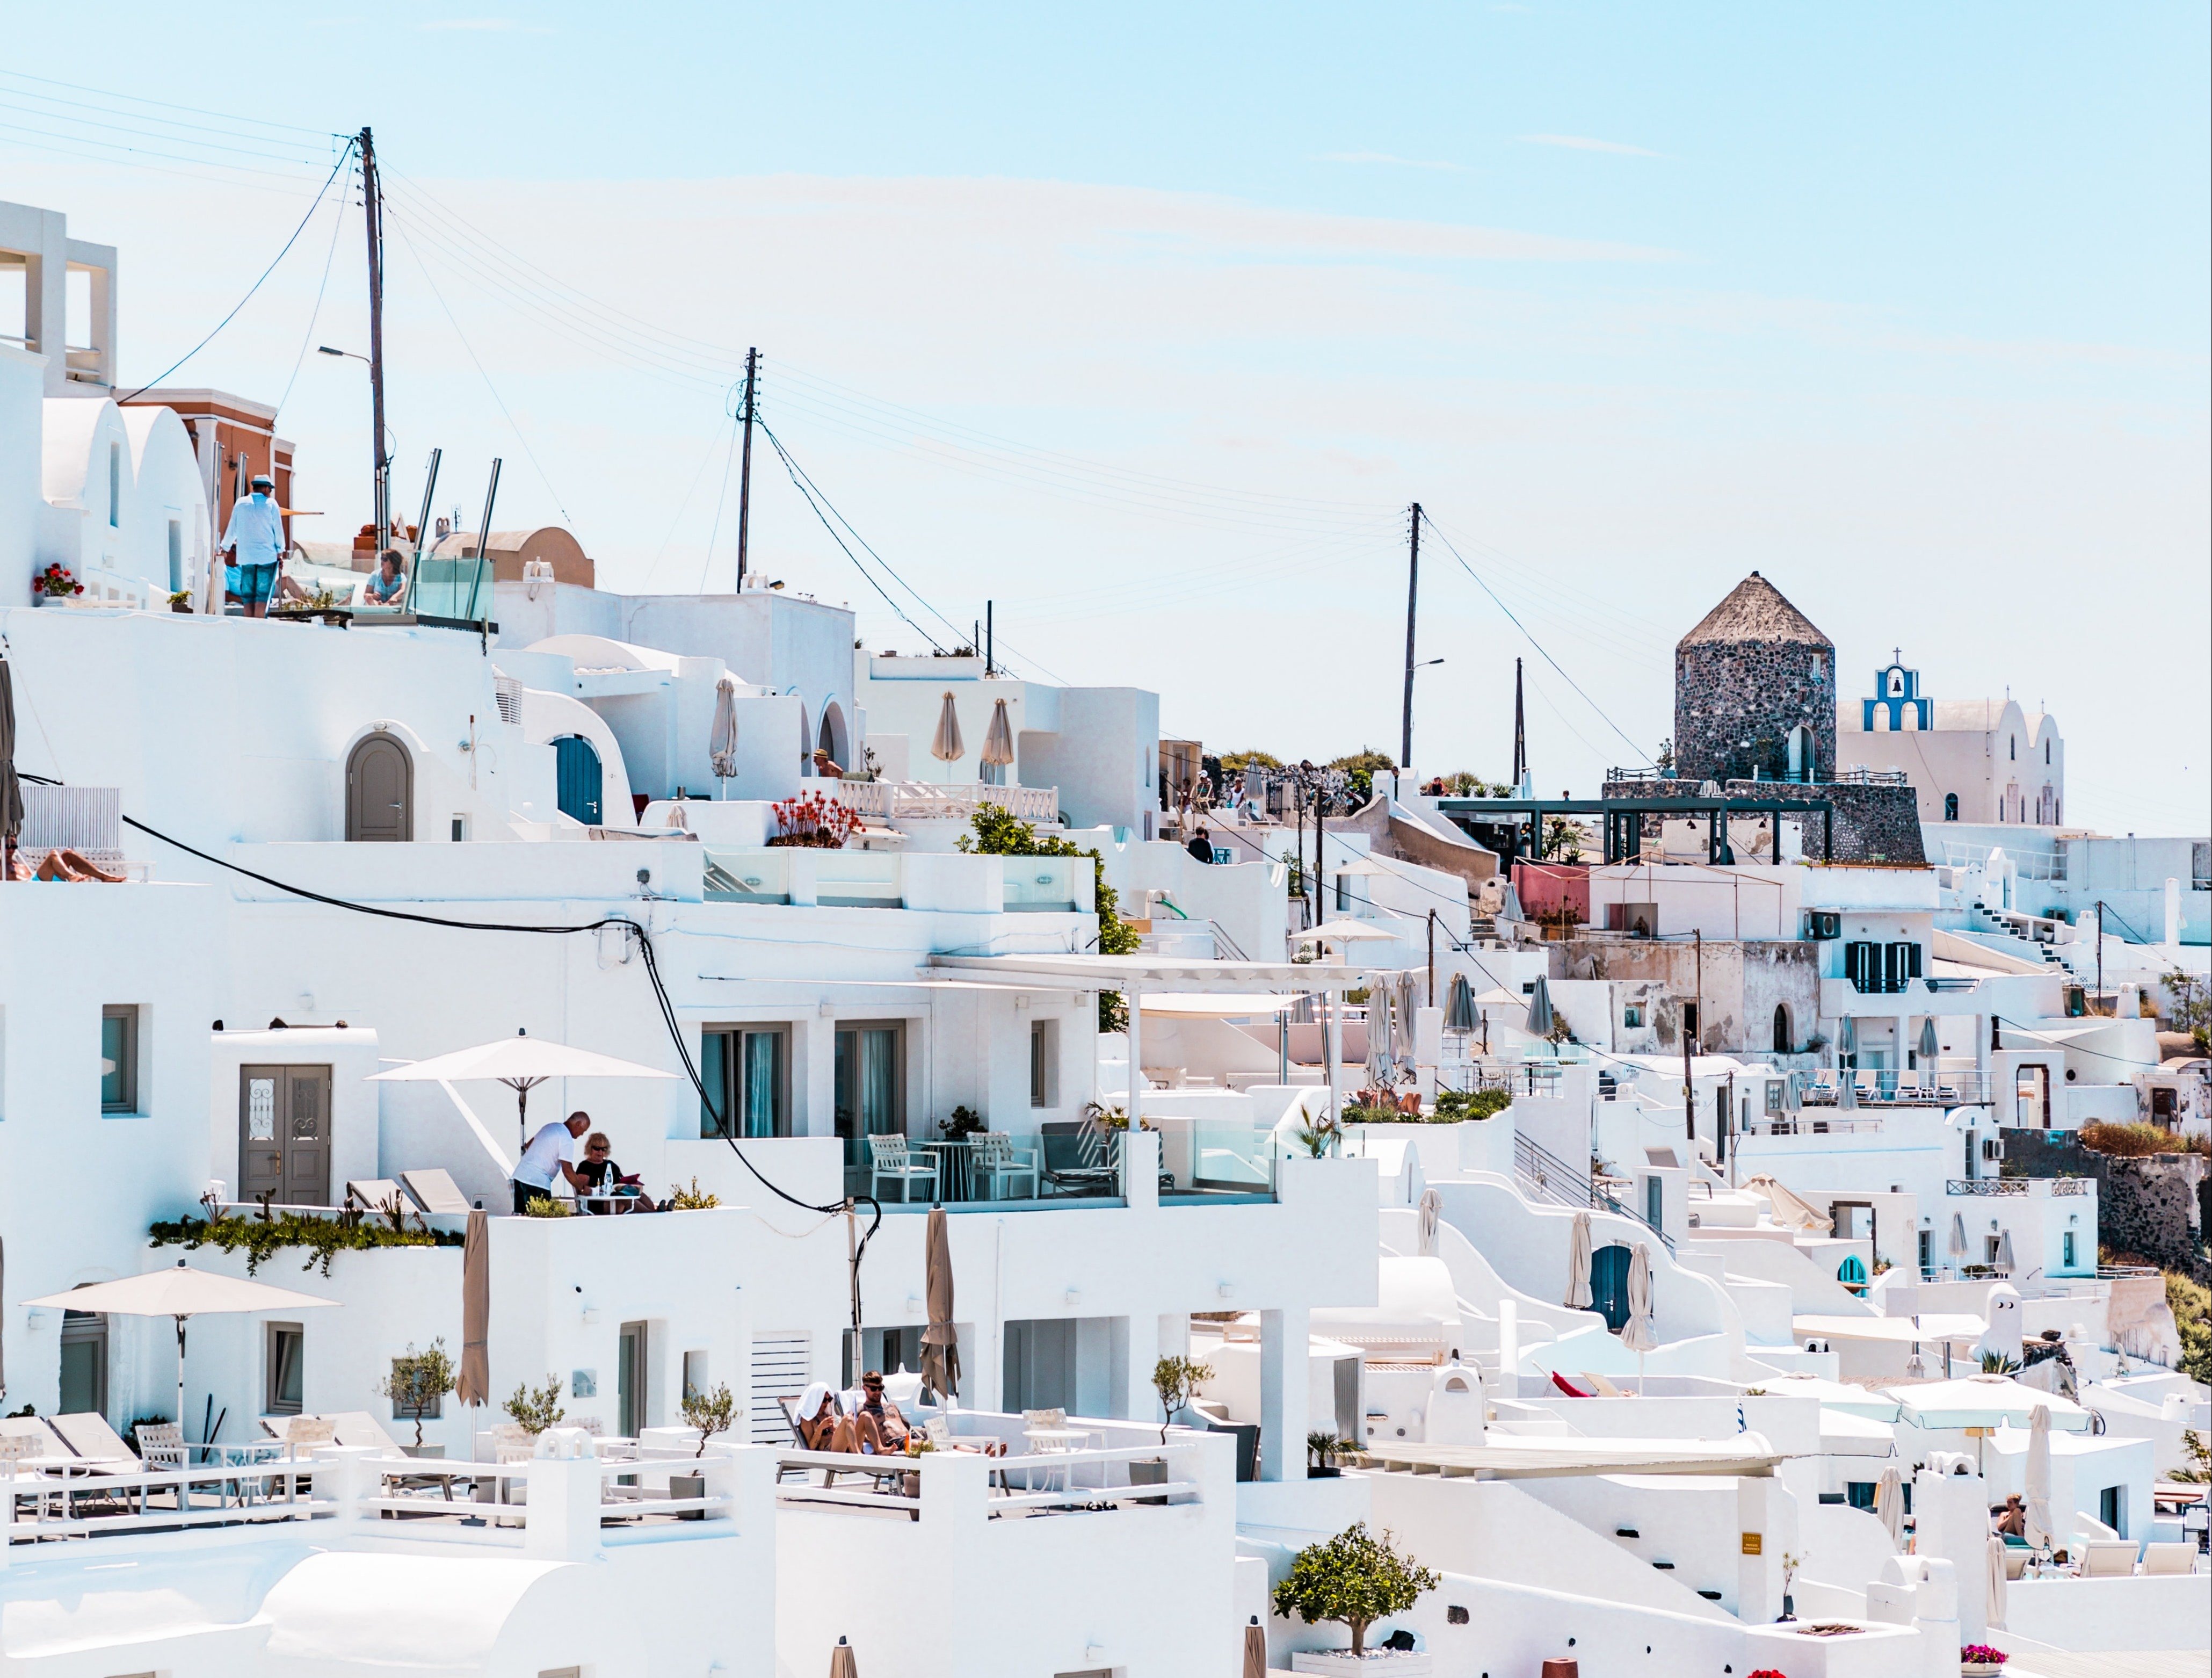 Greece covered in white buildings.